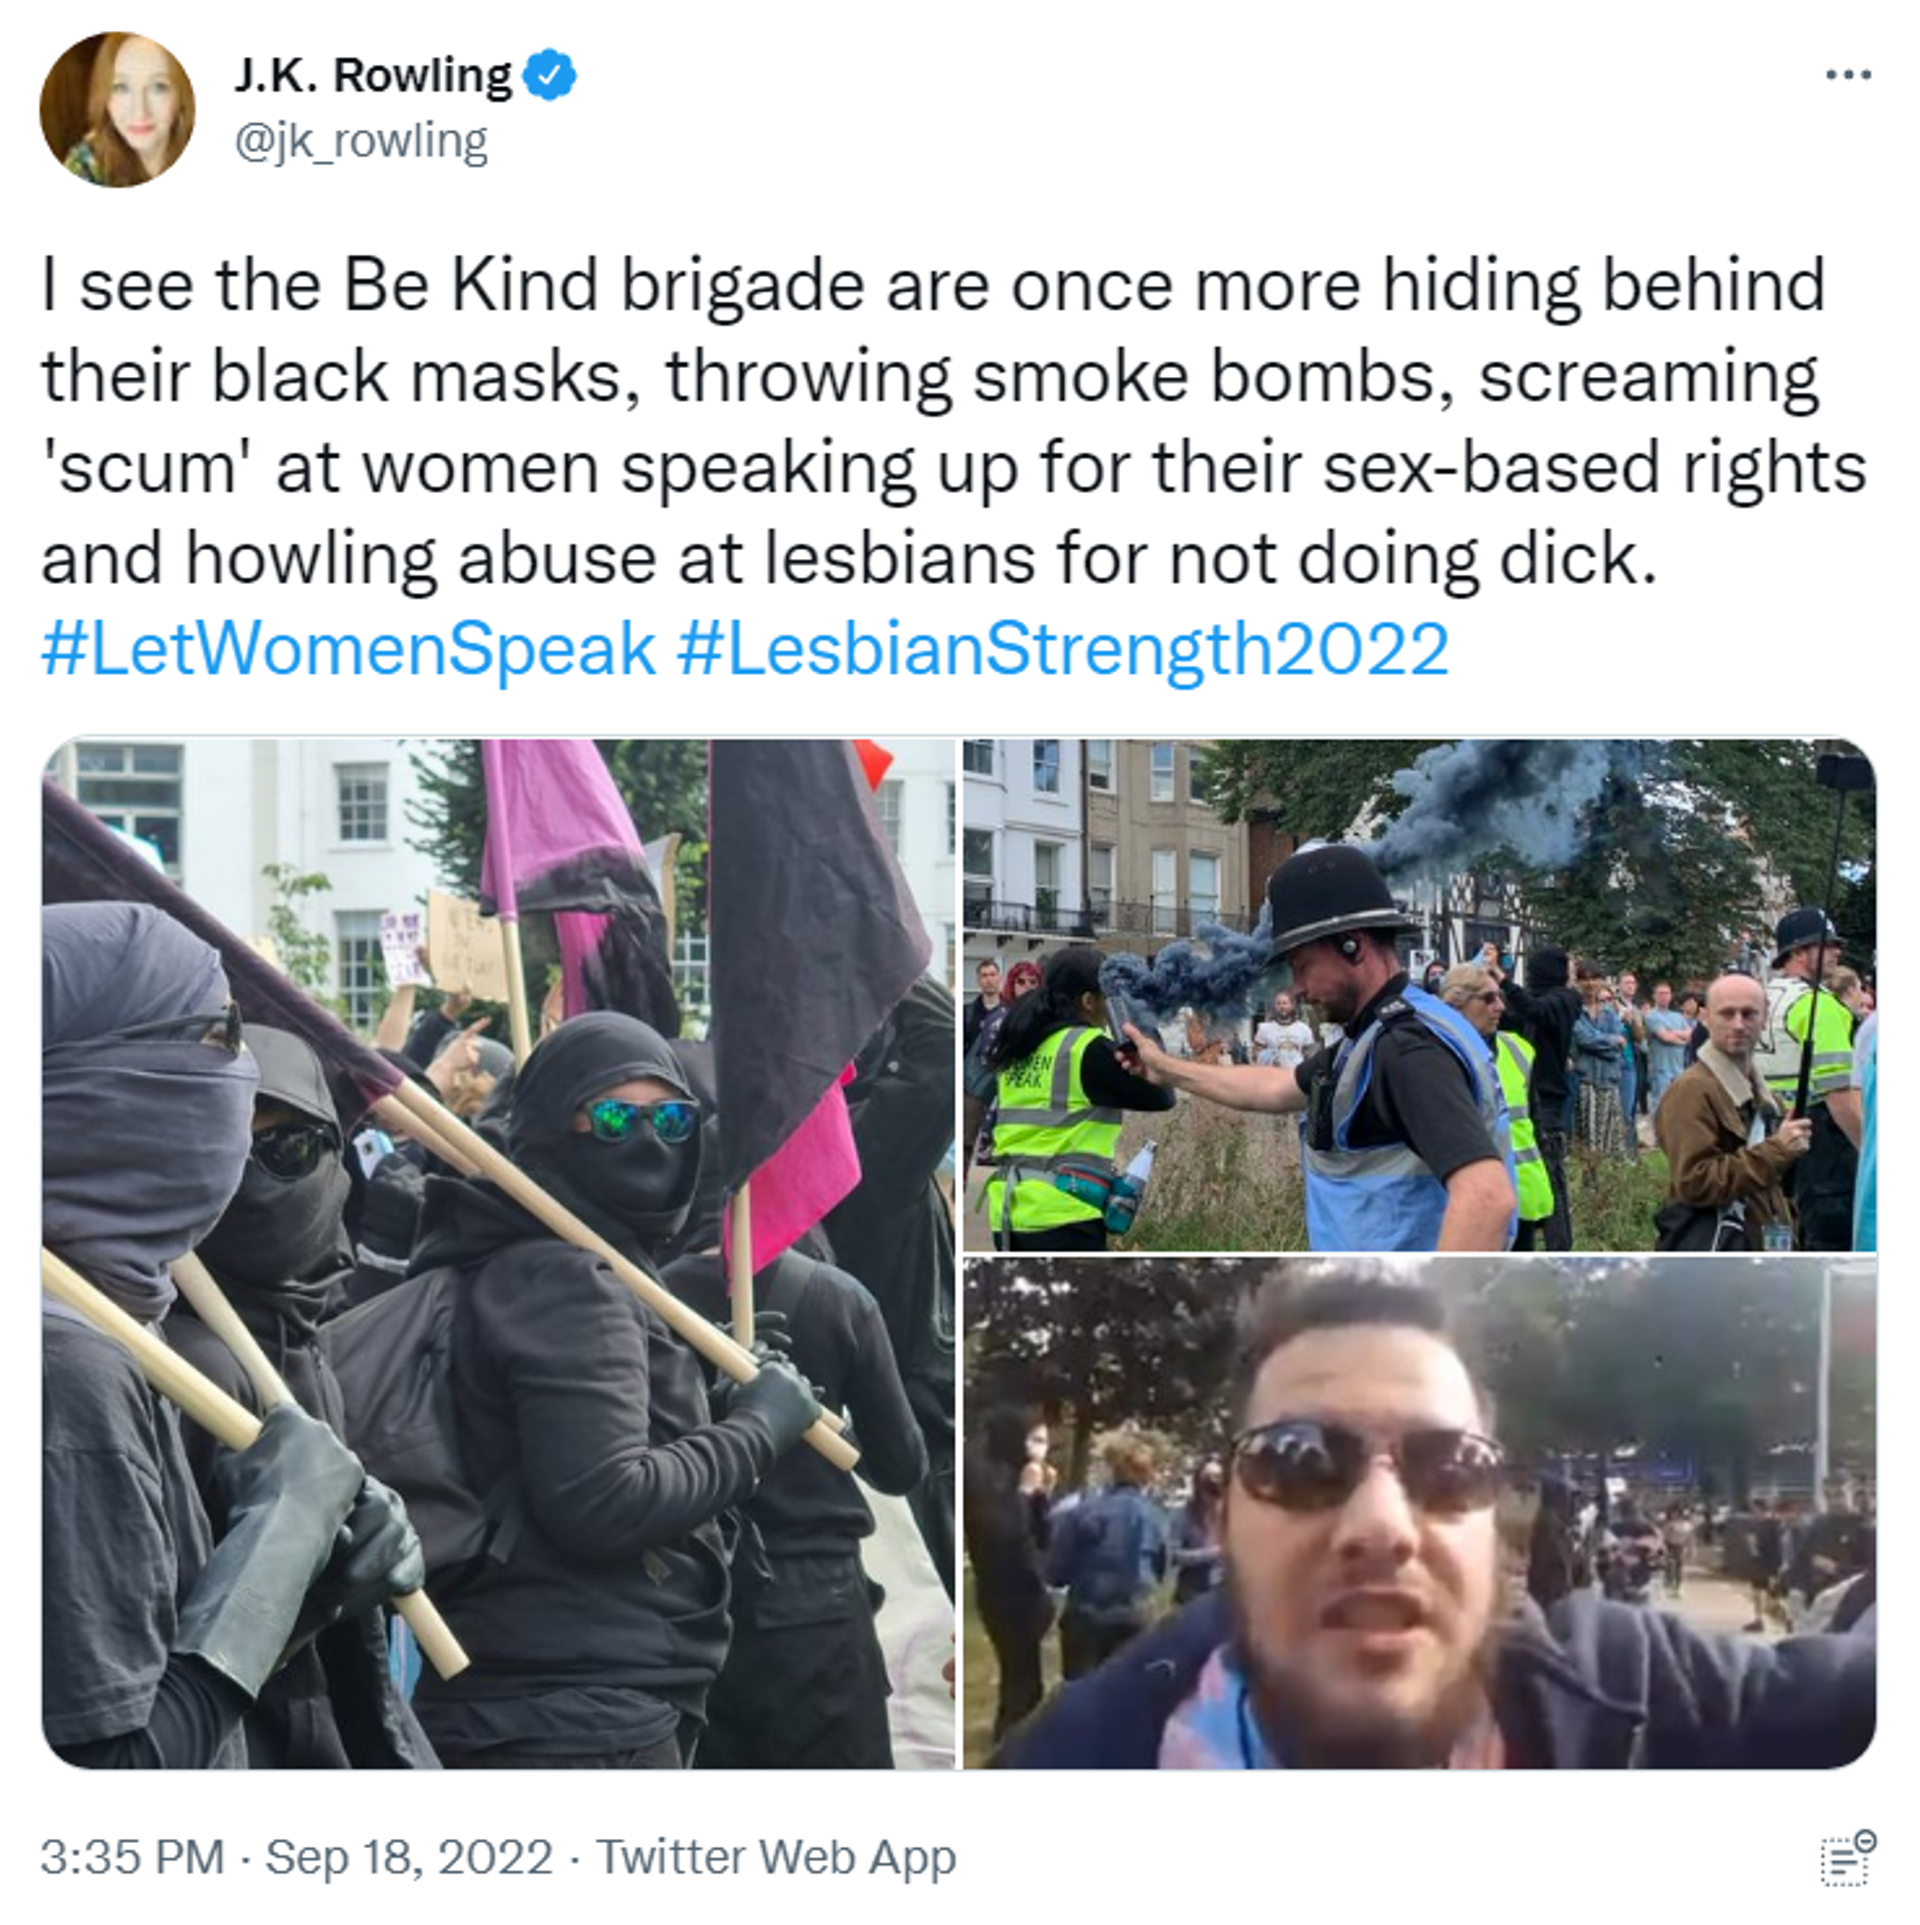 Author J.K. Rowling condemns a trans rights counter-protest at a feminist rally in Brighton on September 18 in a tweet - Sputnik International, 1920, 19.09.2022